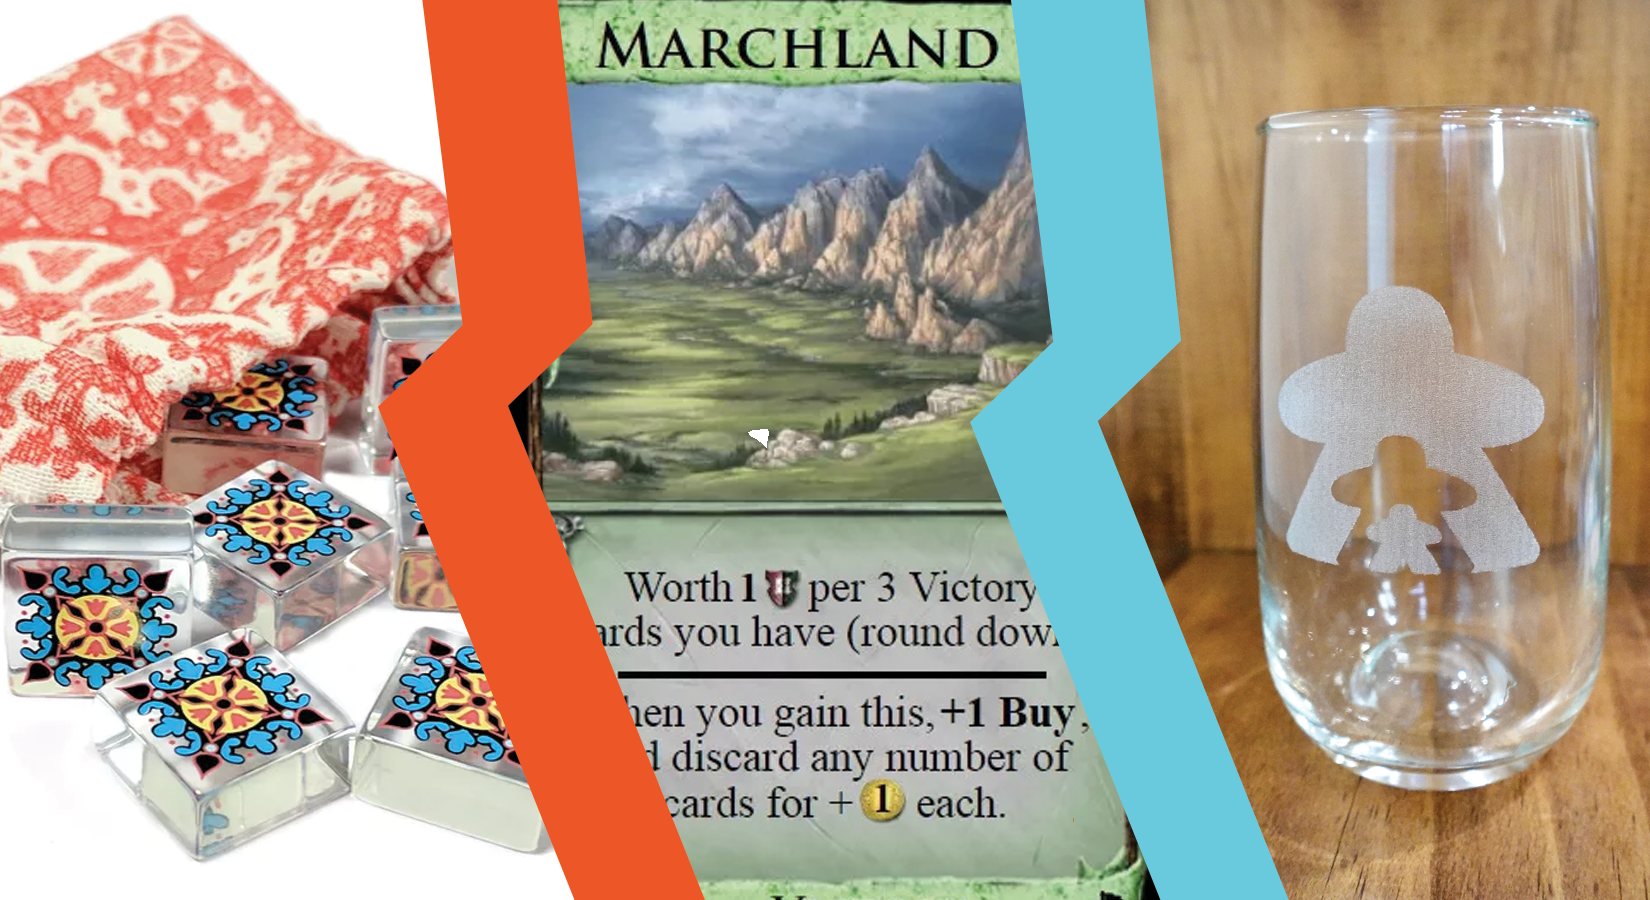 A set of three image, separated by angular stripes. In the left image, a tumble of transparent square tiles fall out of a cloth bag. In the center, a card title Marchlands, with a landscape painting in the middle, and text describing the card's power at the bottom. On the right, a photo of a drinking glass with a frosted design of three person-shaped outlines, against a wooden background. 